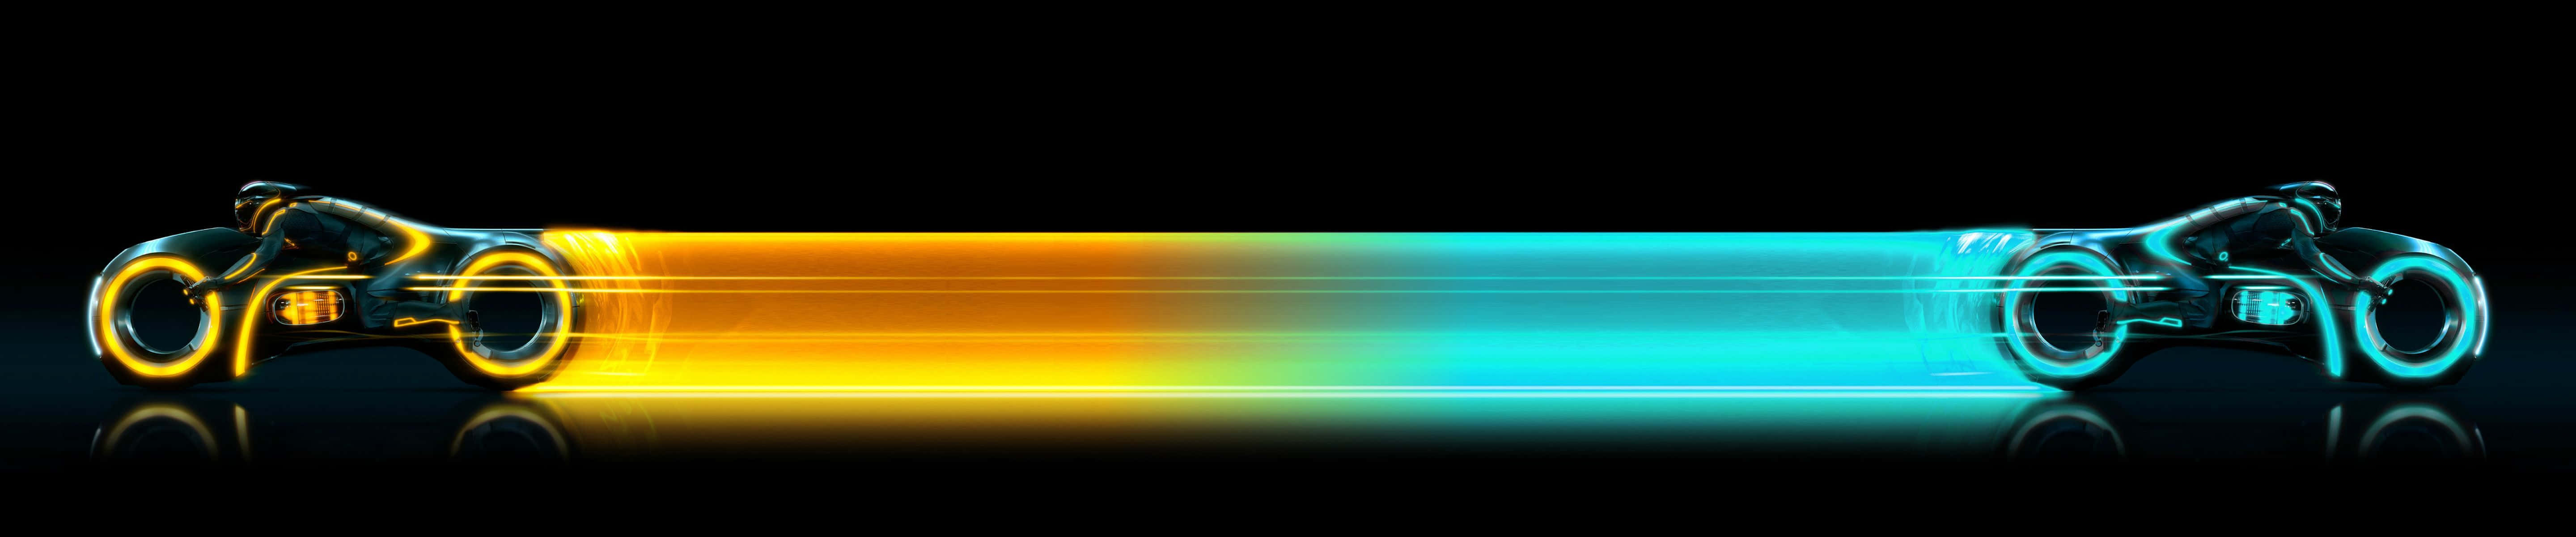 Awesome Tron Yellow And Blue Bikes Pixel 3 Monitor Background